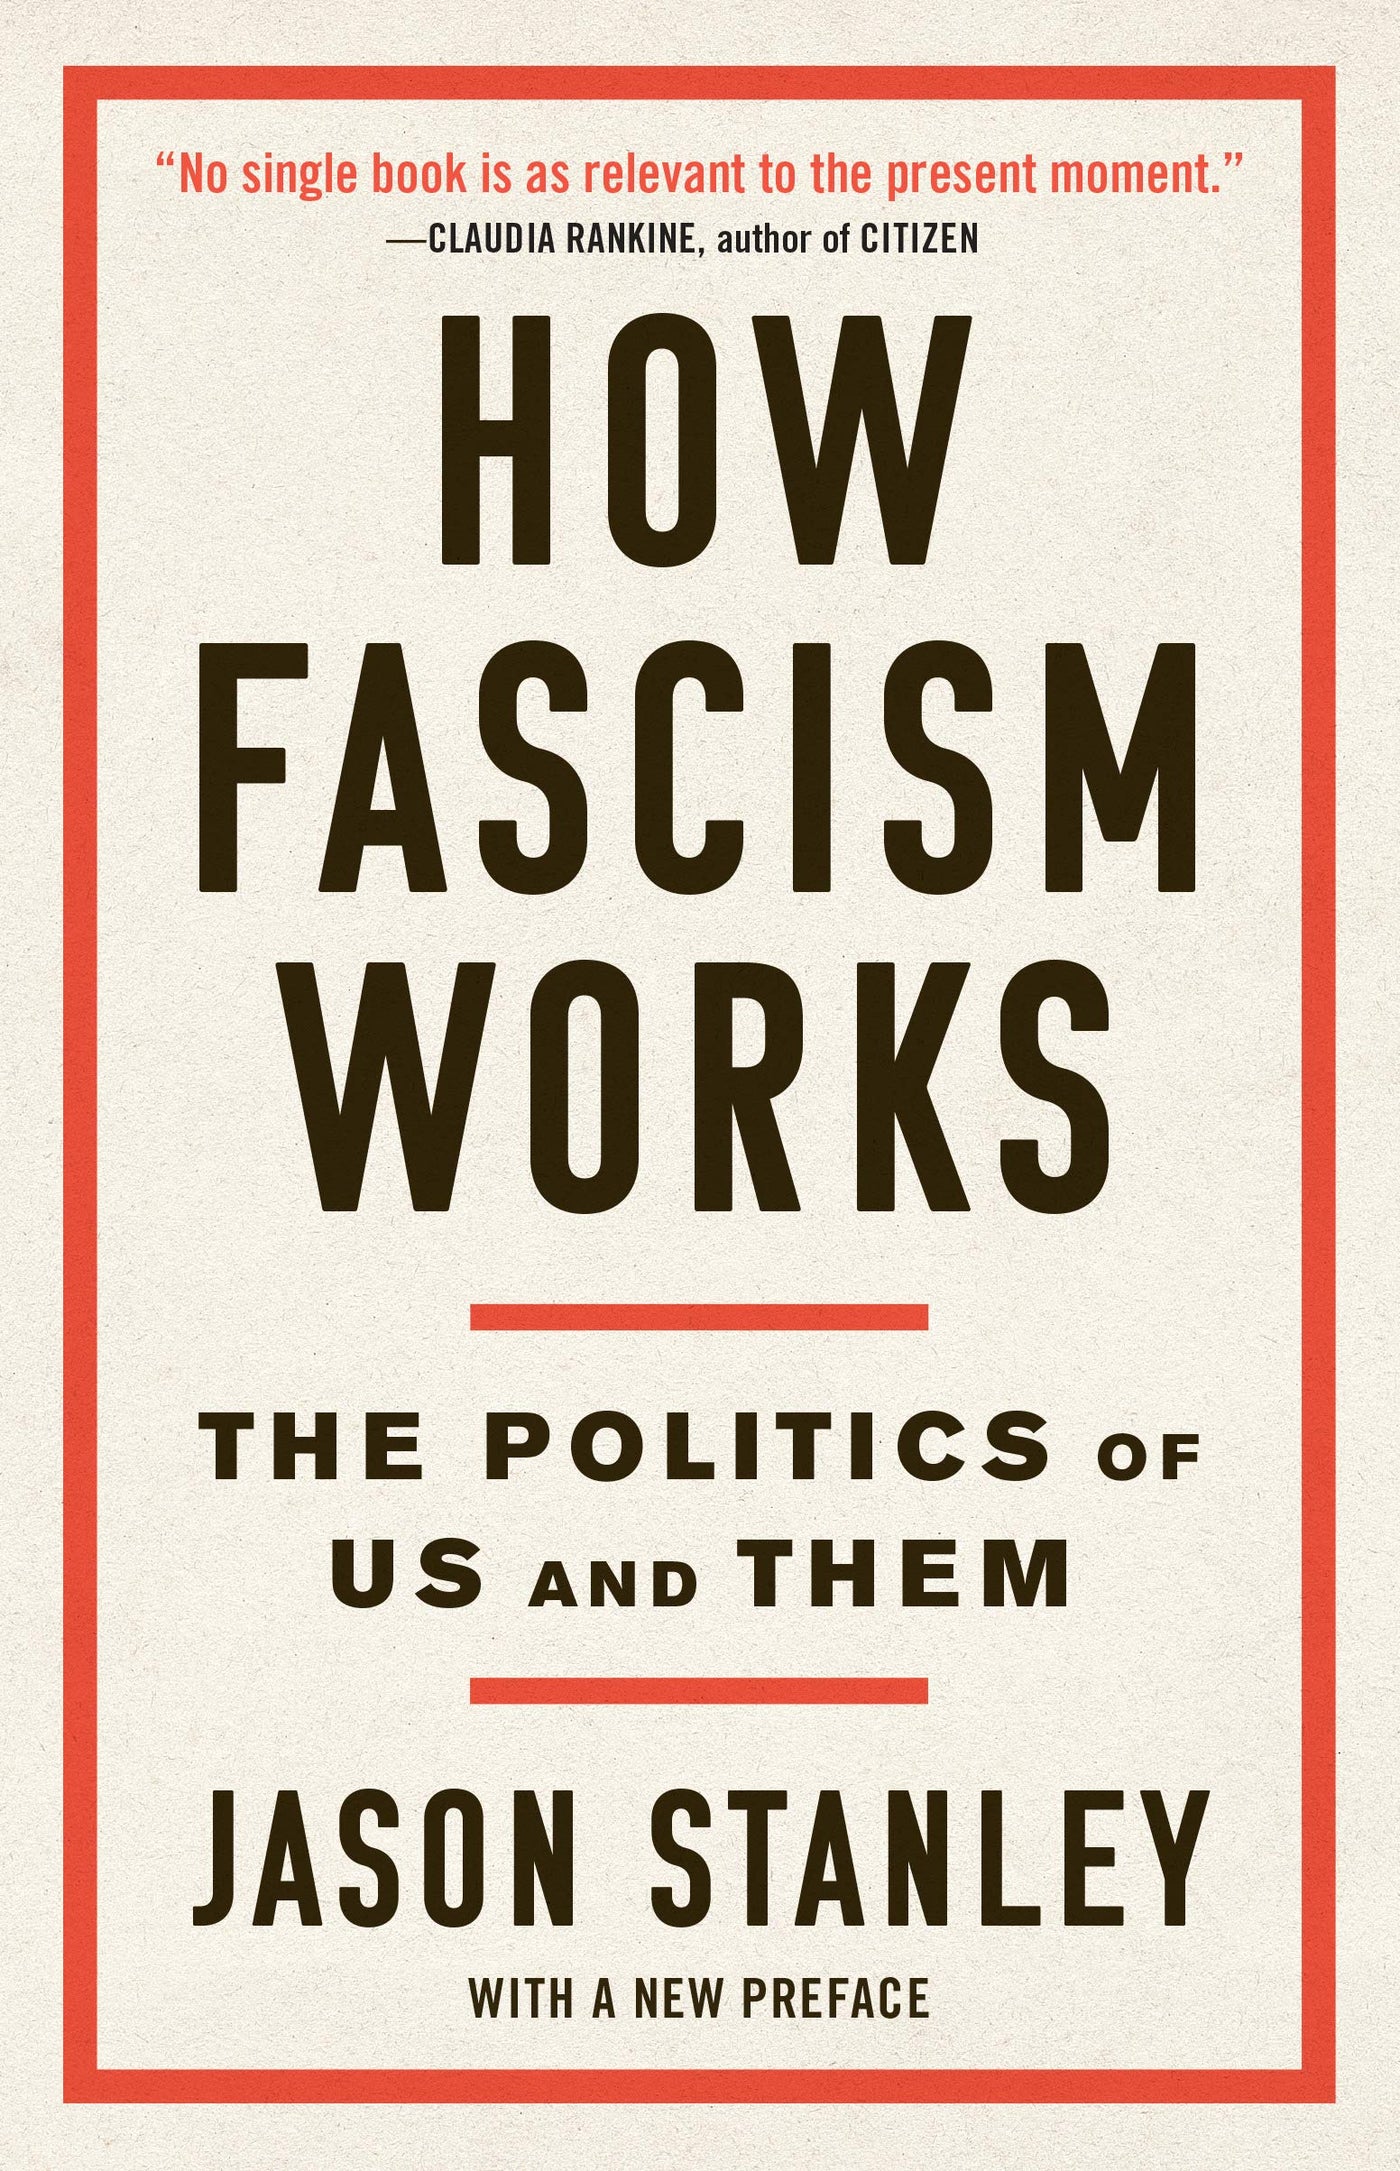 How Fascism Works: The Politics of Us and Them by Jason Stanley